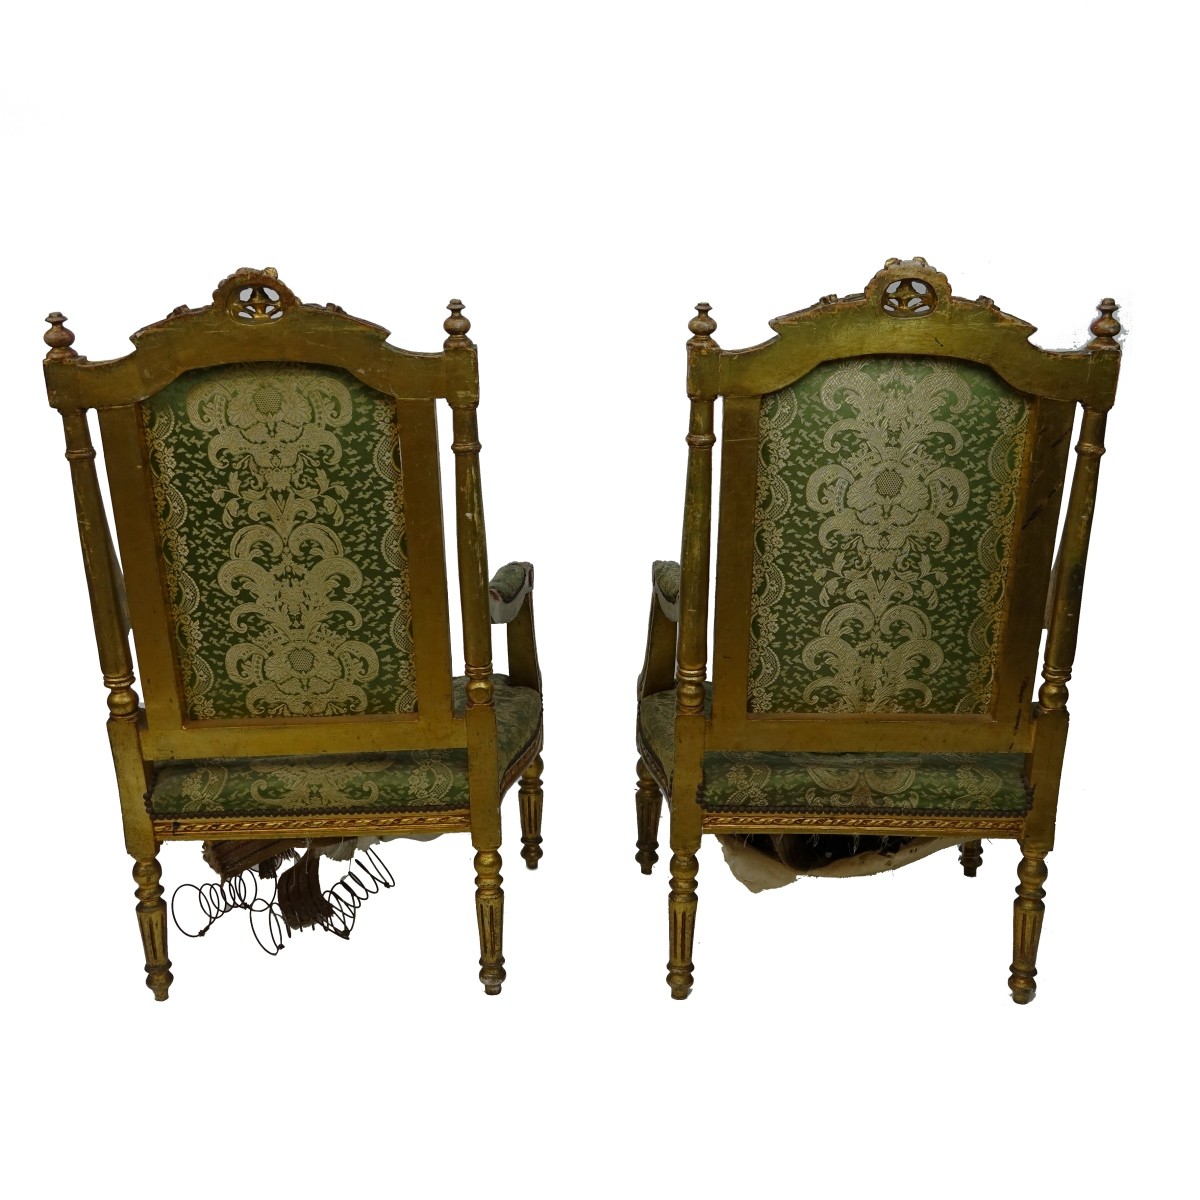 Pair of Louis XVI Style Chairs